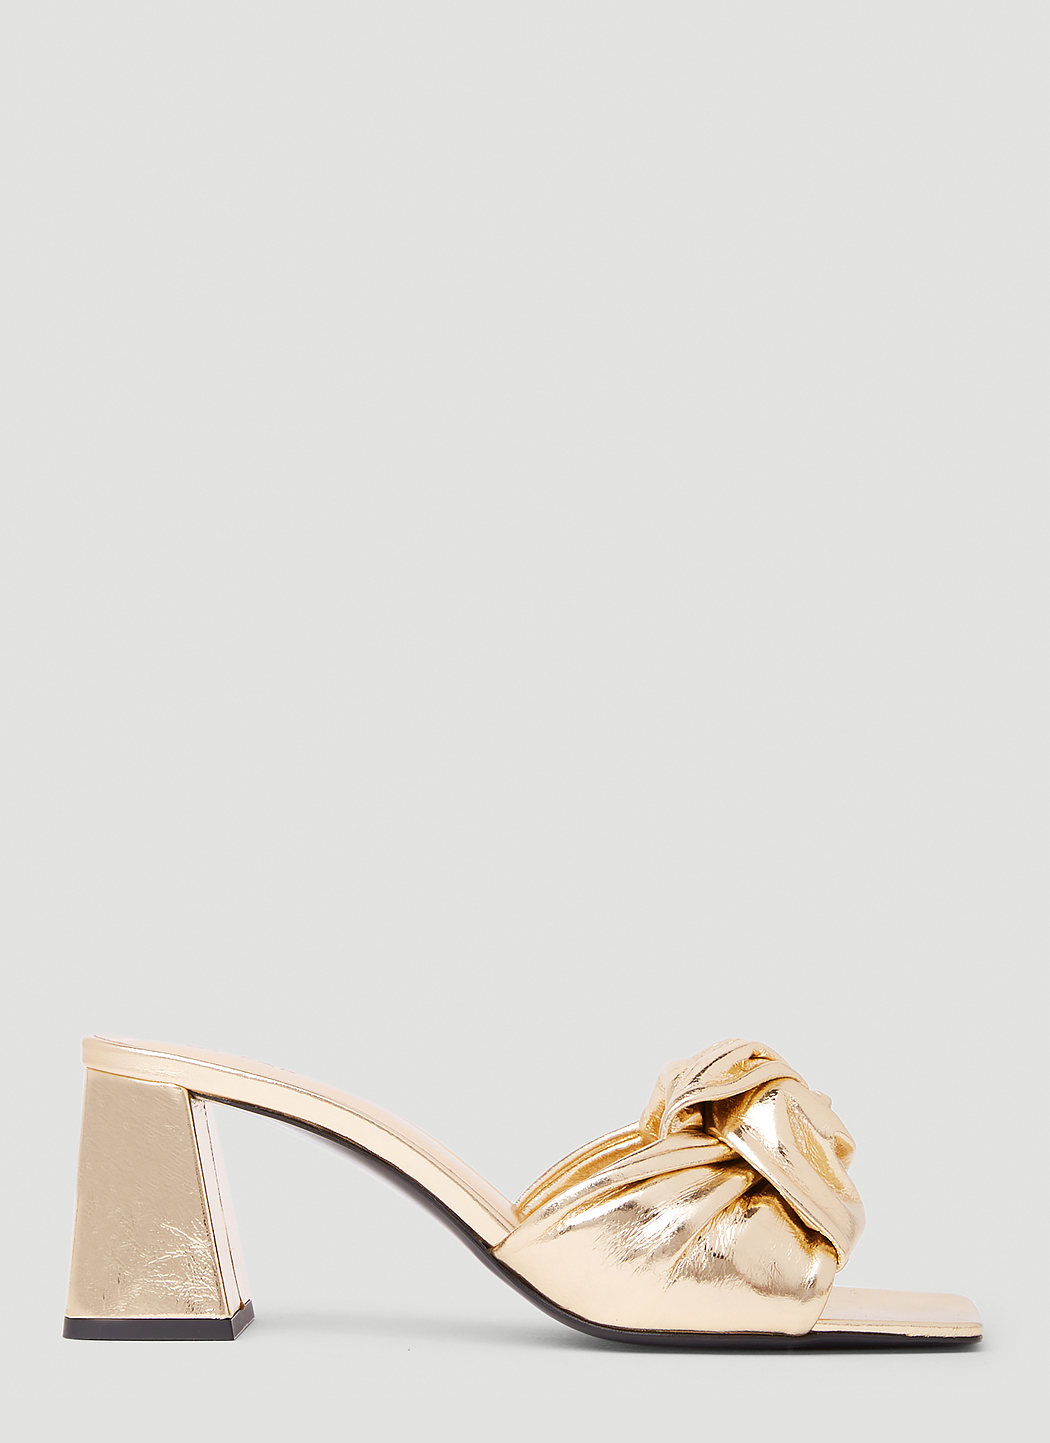 BY FAR Lamar Parchment Heeled Sandals in Gold | LN-CC®